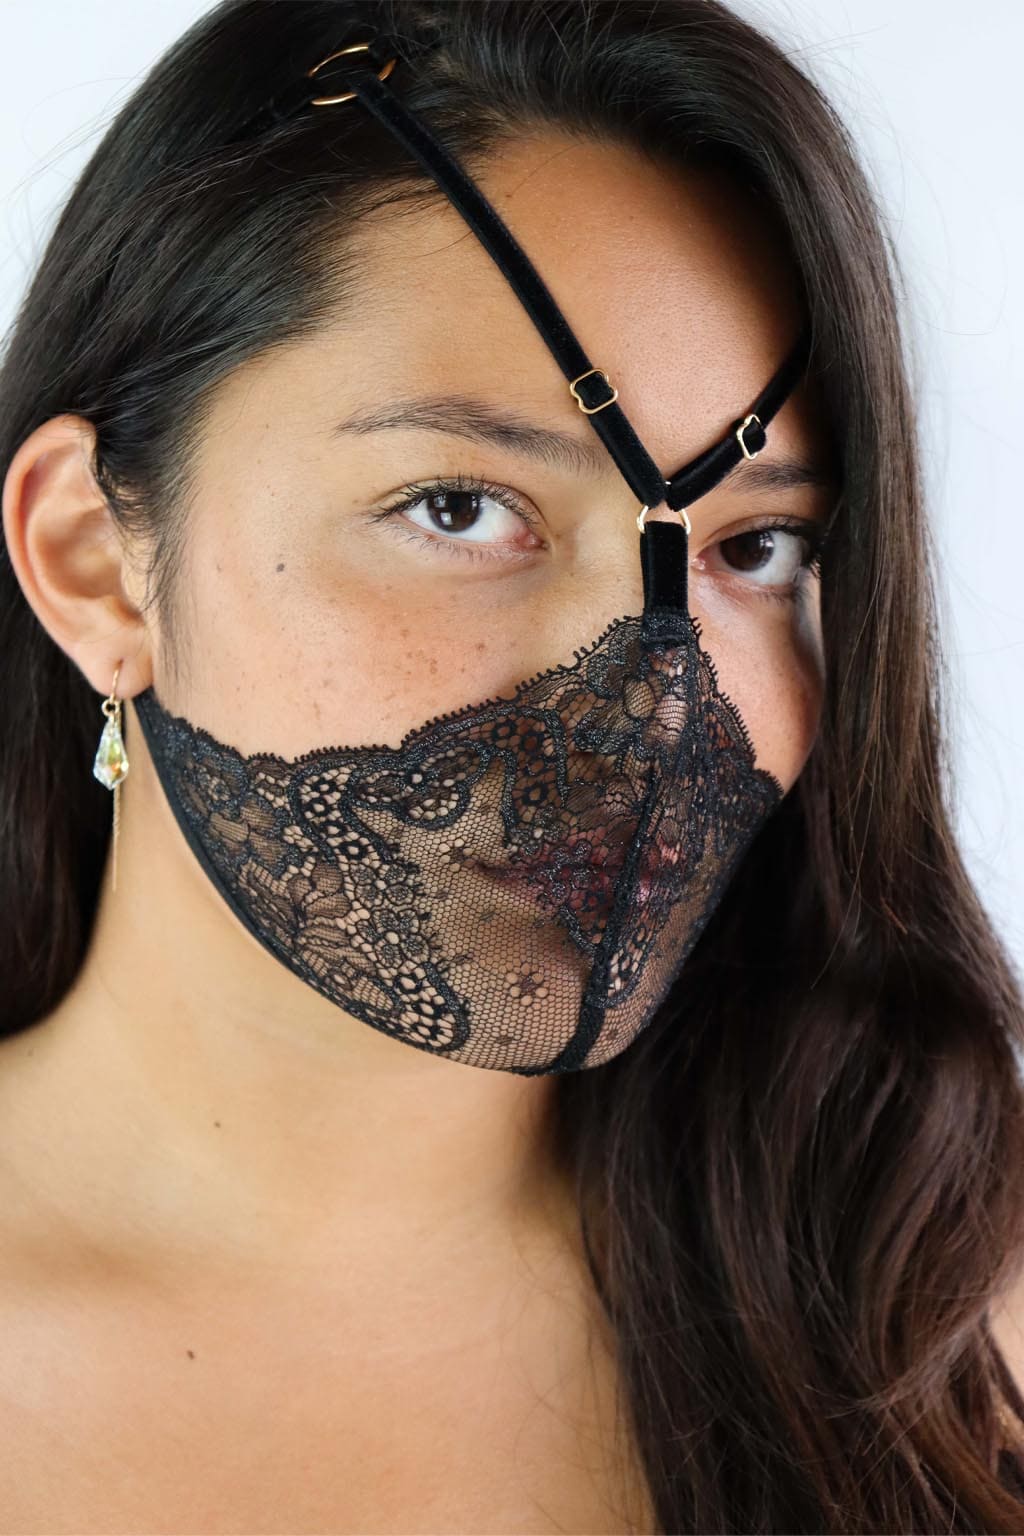 Model wearing a strappy lace face harness, with black lace with silver accents and gold hardware.